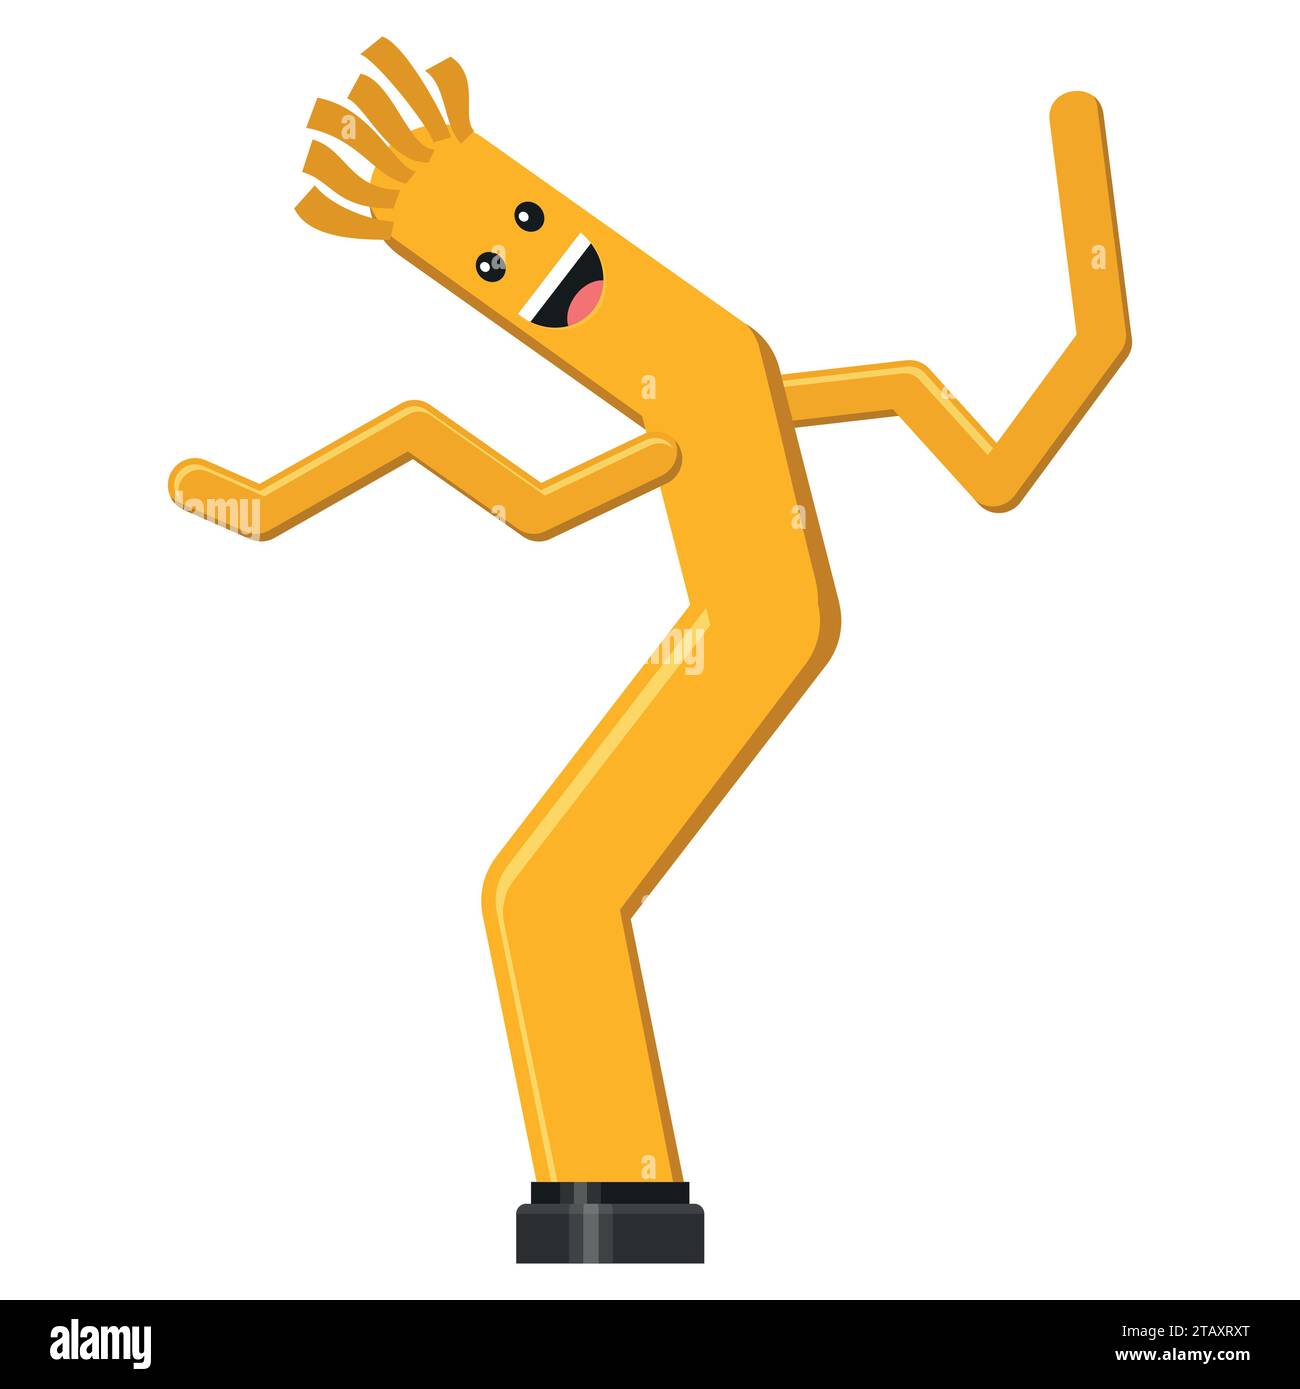 Dancing inflatable yellow tube man in flat style isolated on white background. Wacky waving air hand for sales and advertising. Vector illustration Stock Vector